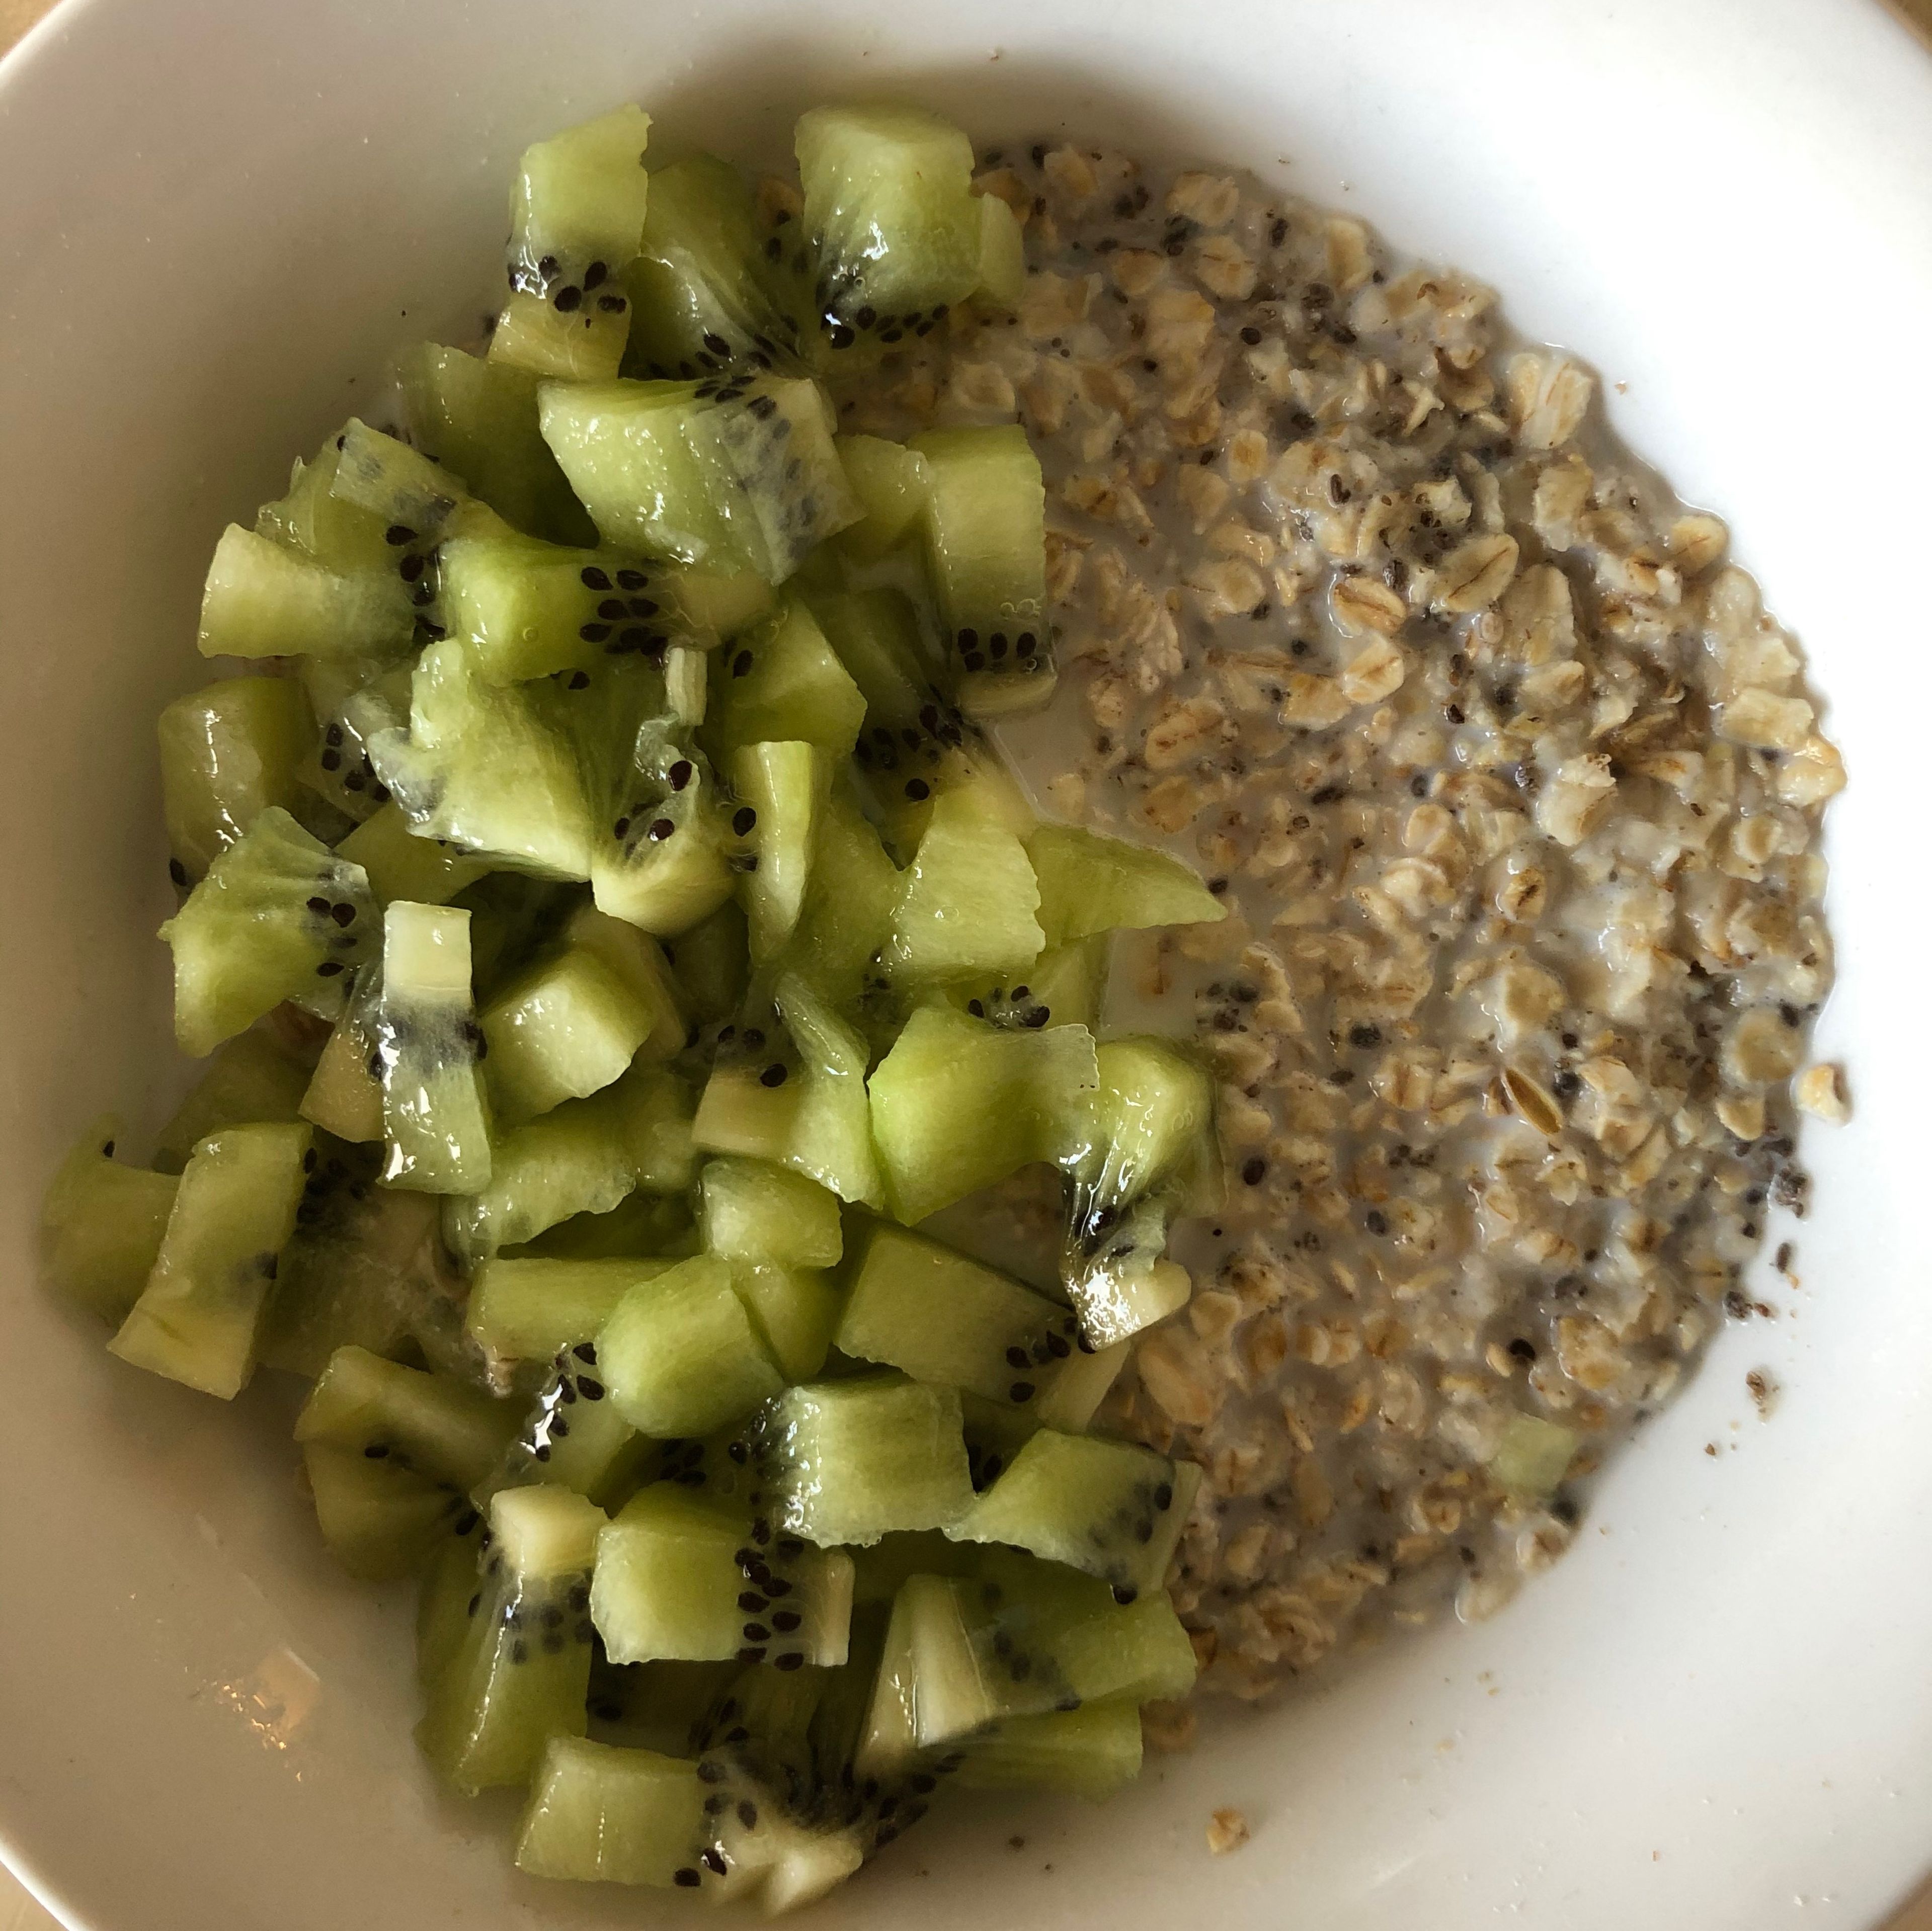 Put the kiwi on top of your oats